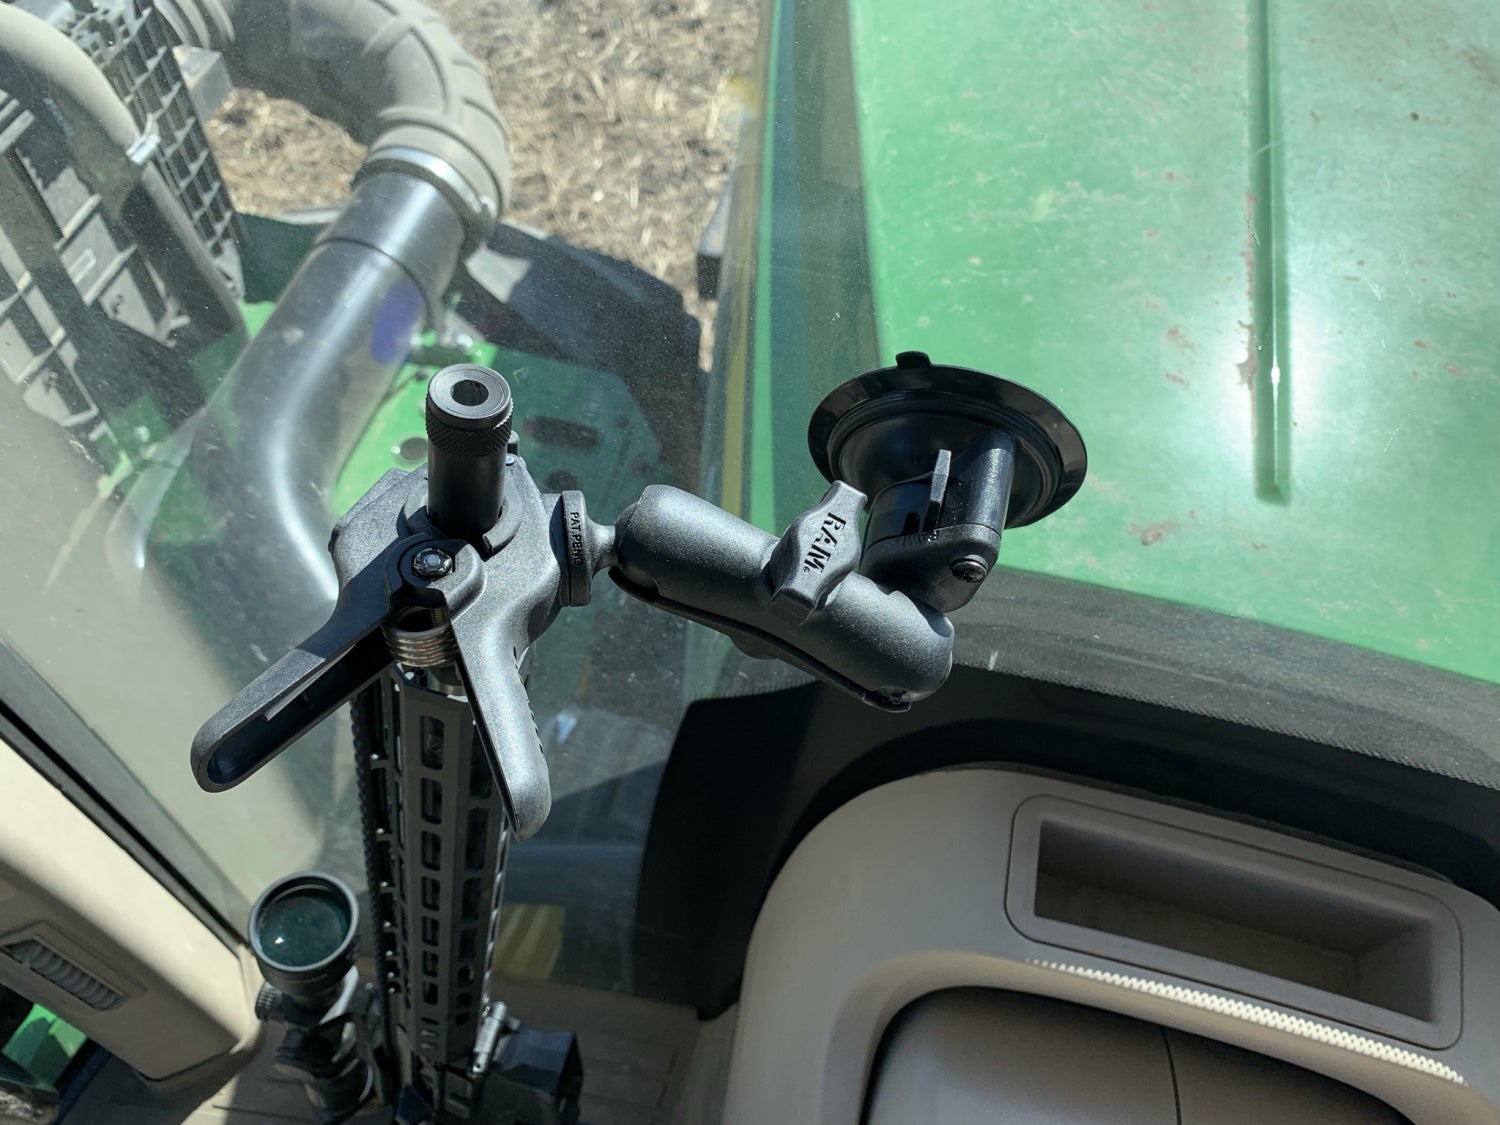 POTD: Mounting a rifle in a tractor